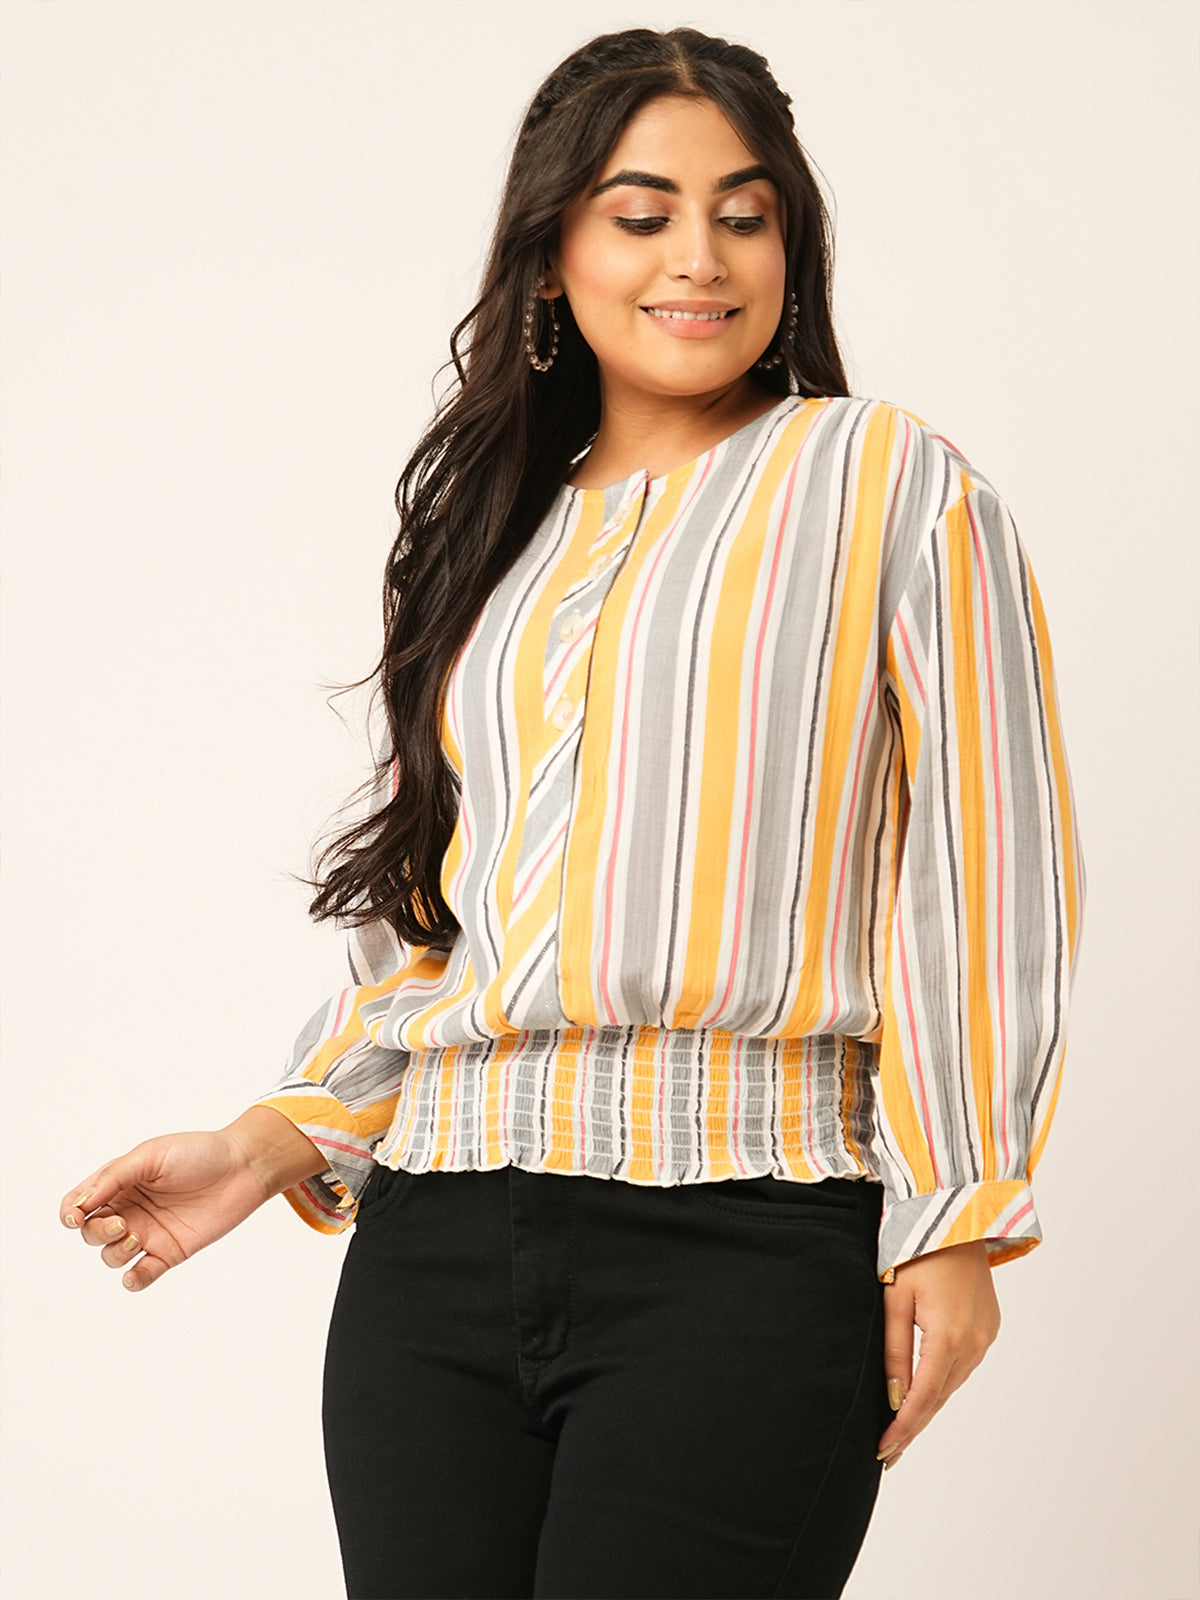 Odette Mustard Cotton Printed Top For Women